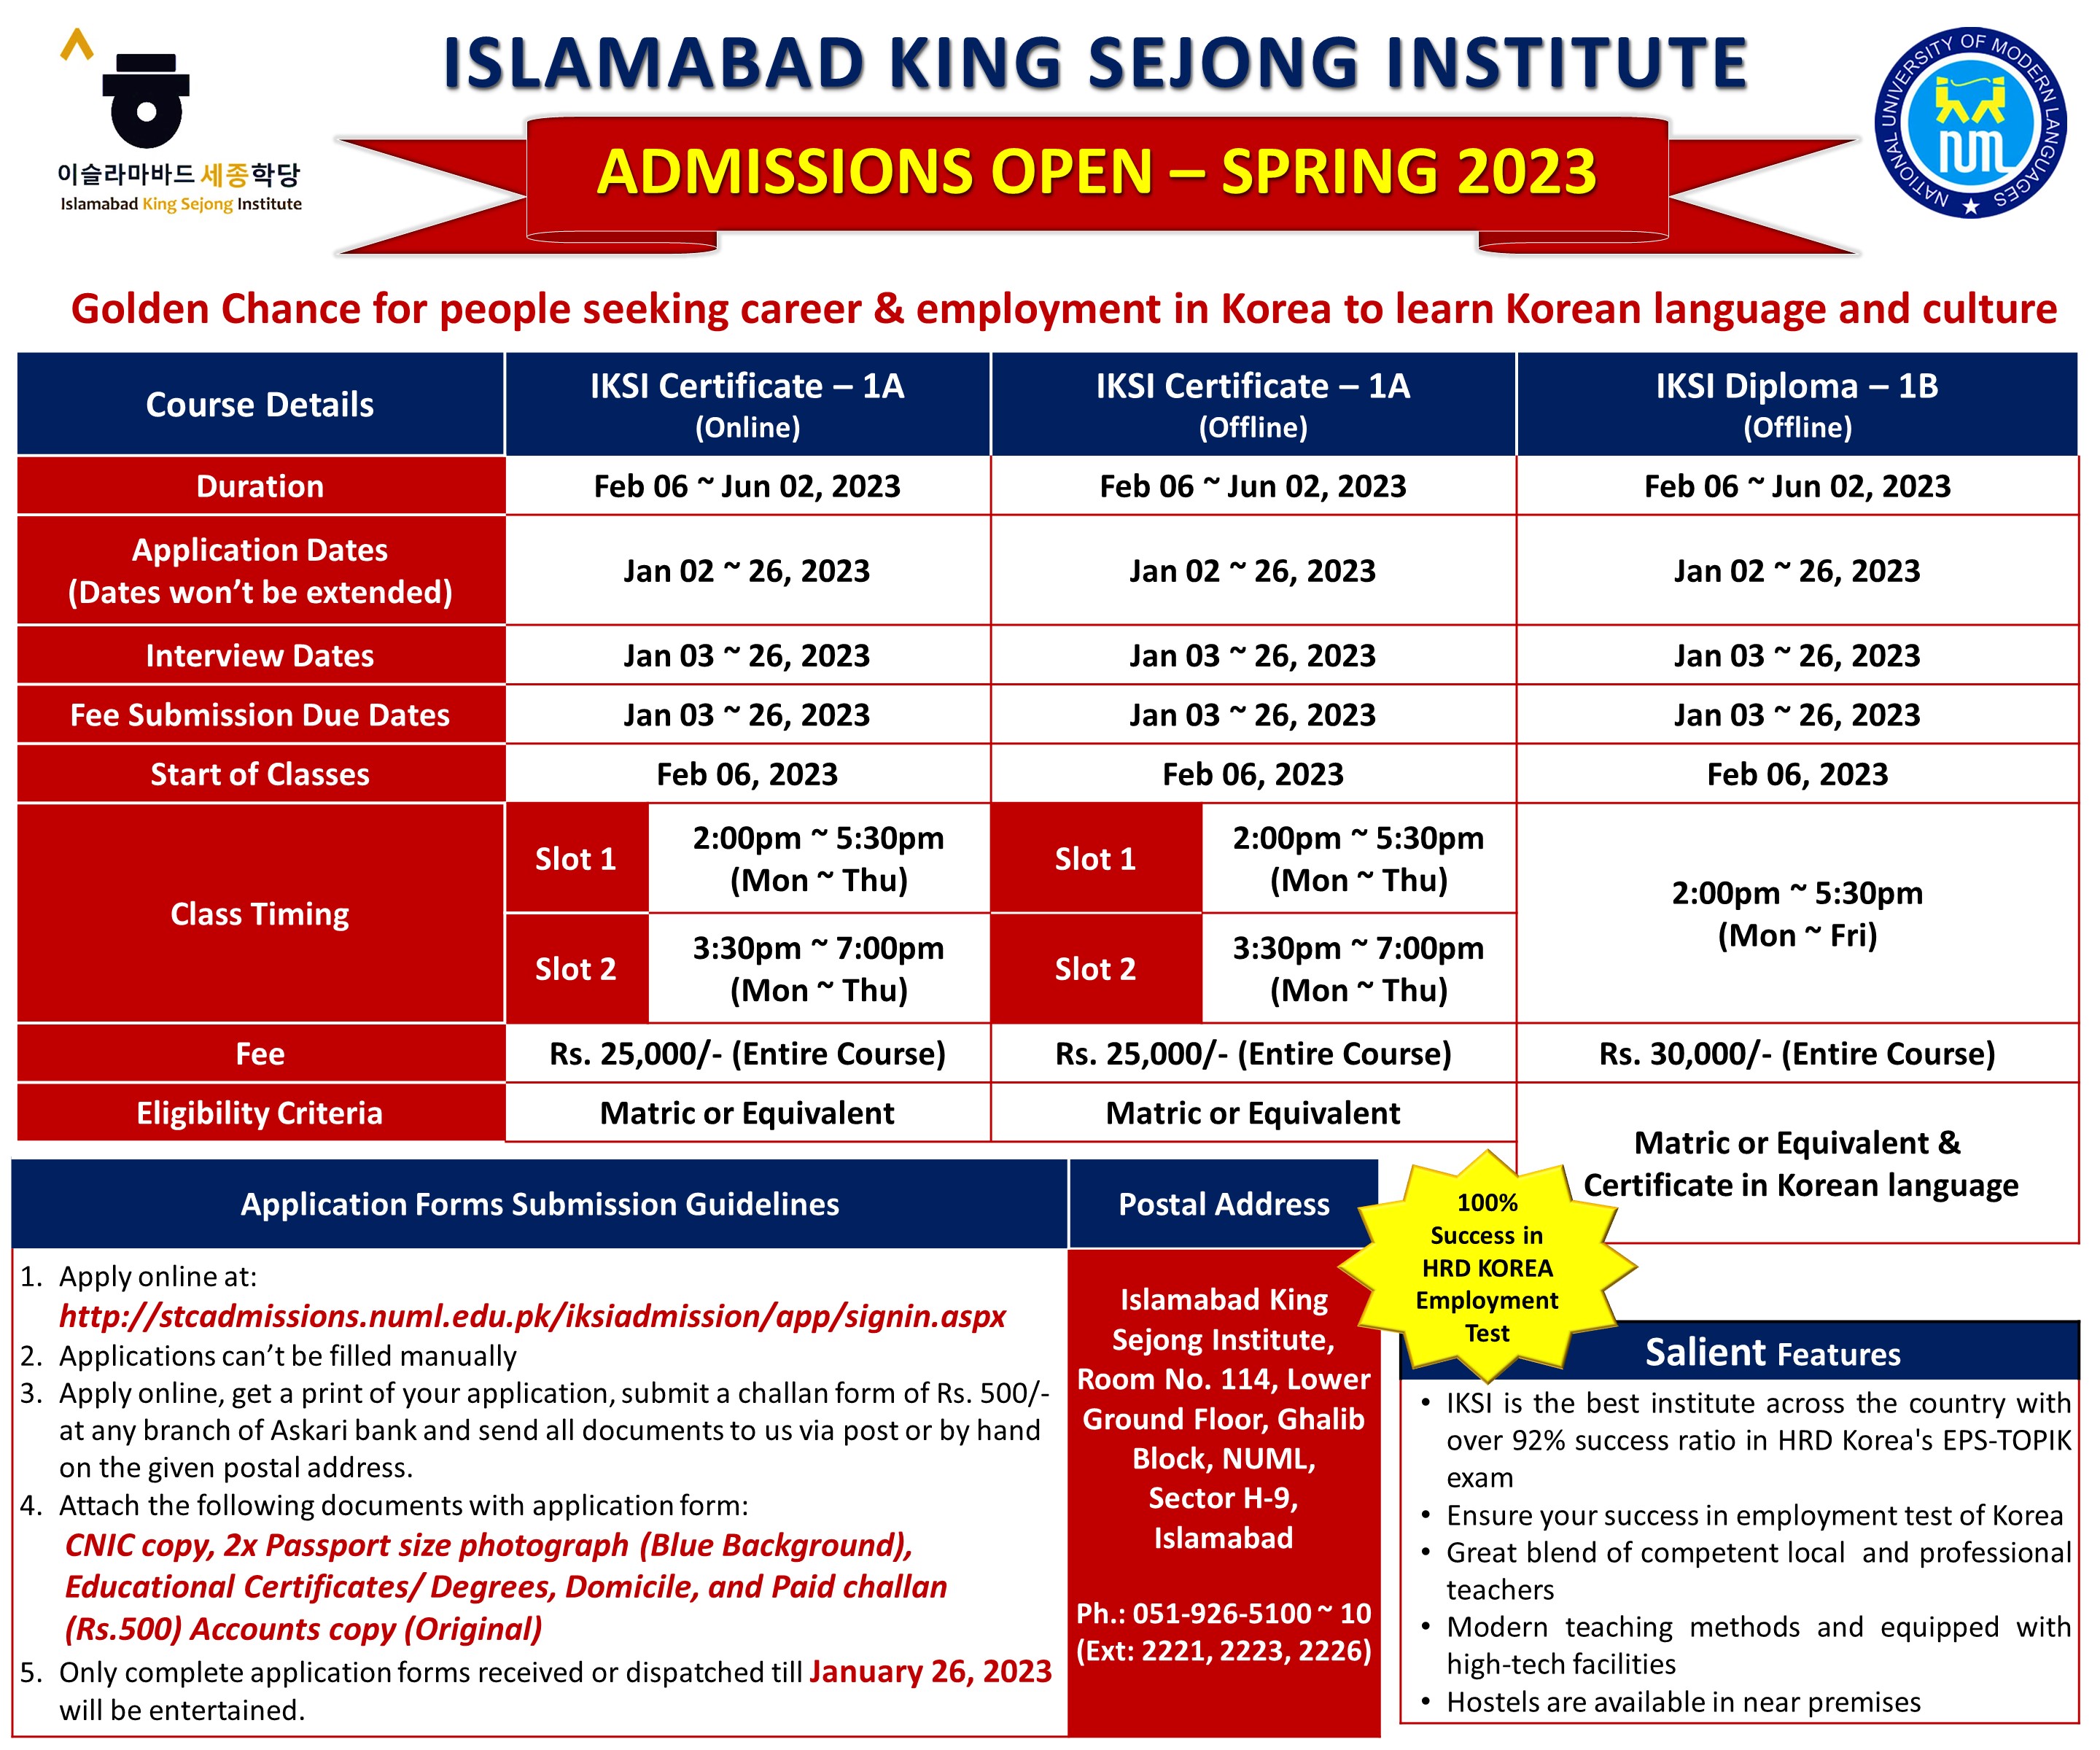 ISLAMABAD KING SEJONG INSTITUTE - ADMISSIONS OPEN SPRING 2023